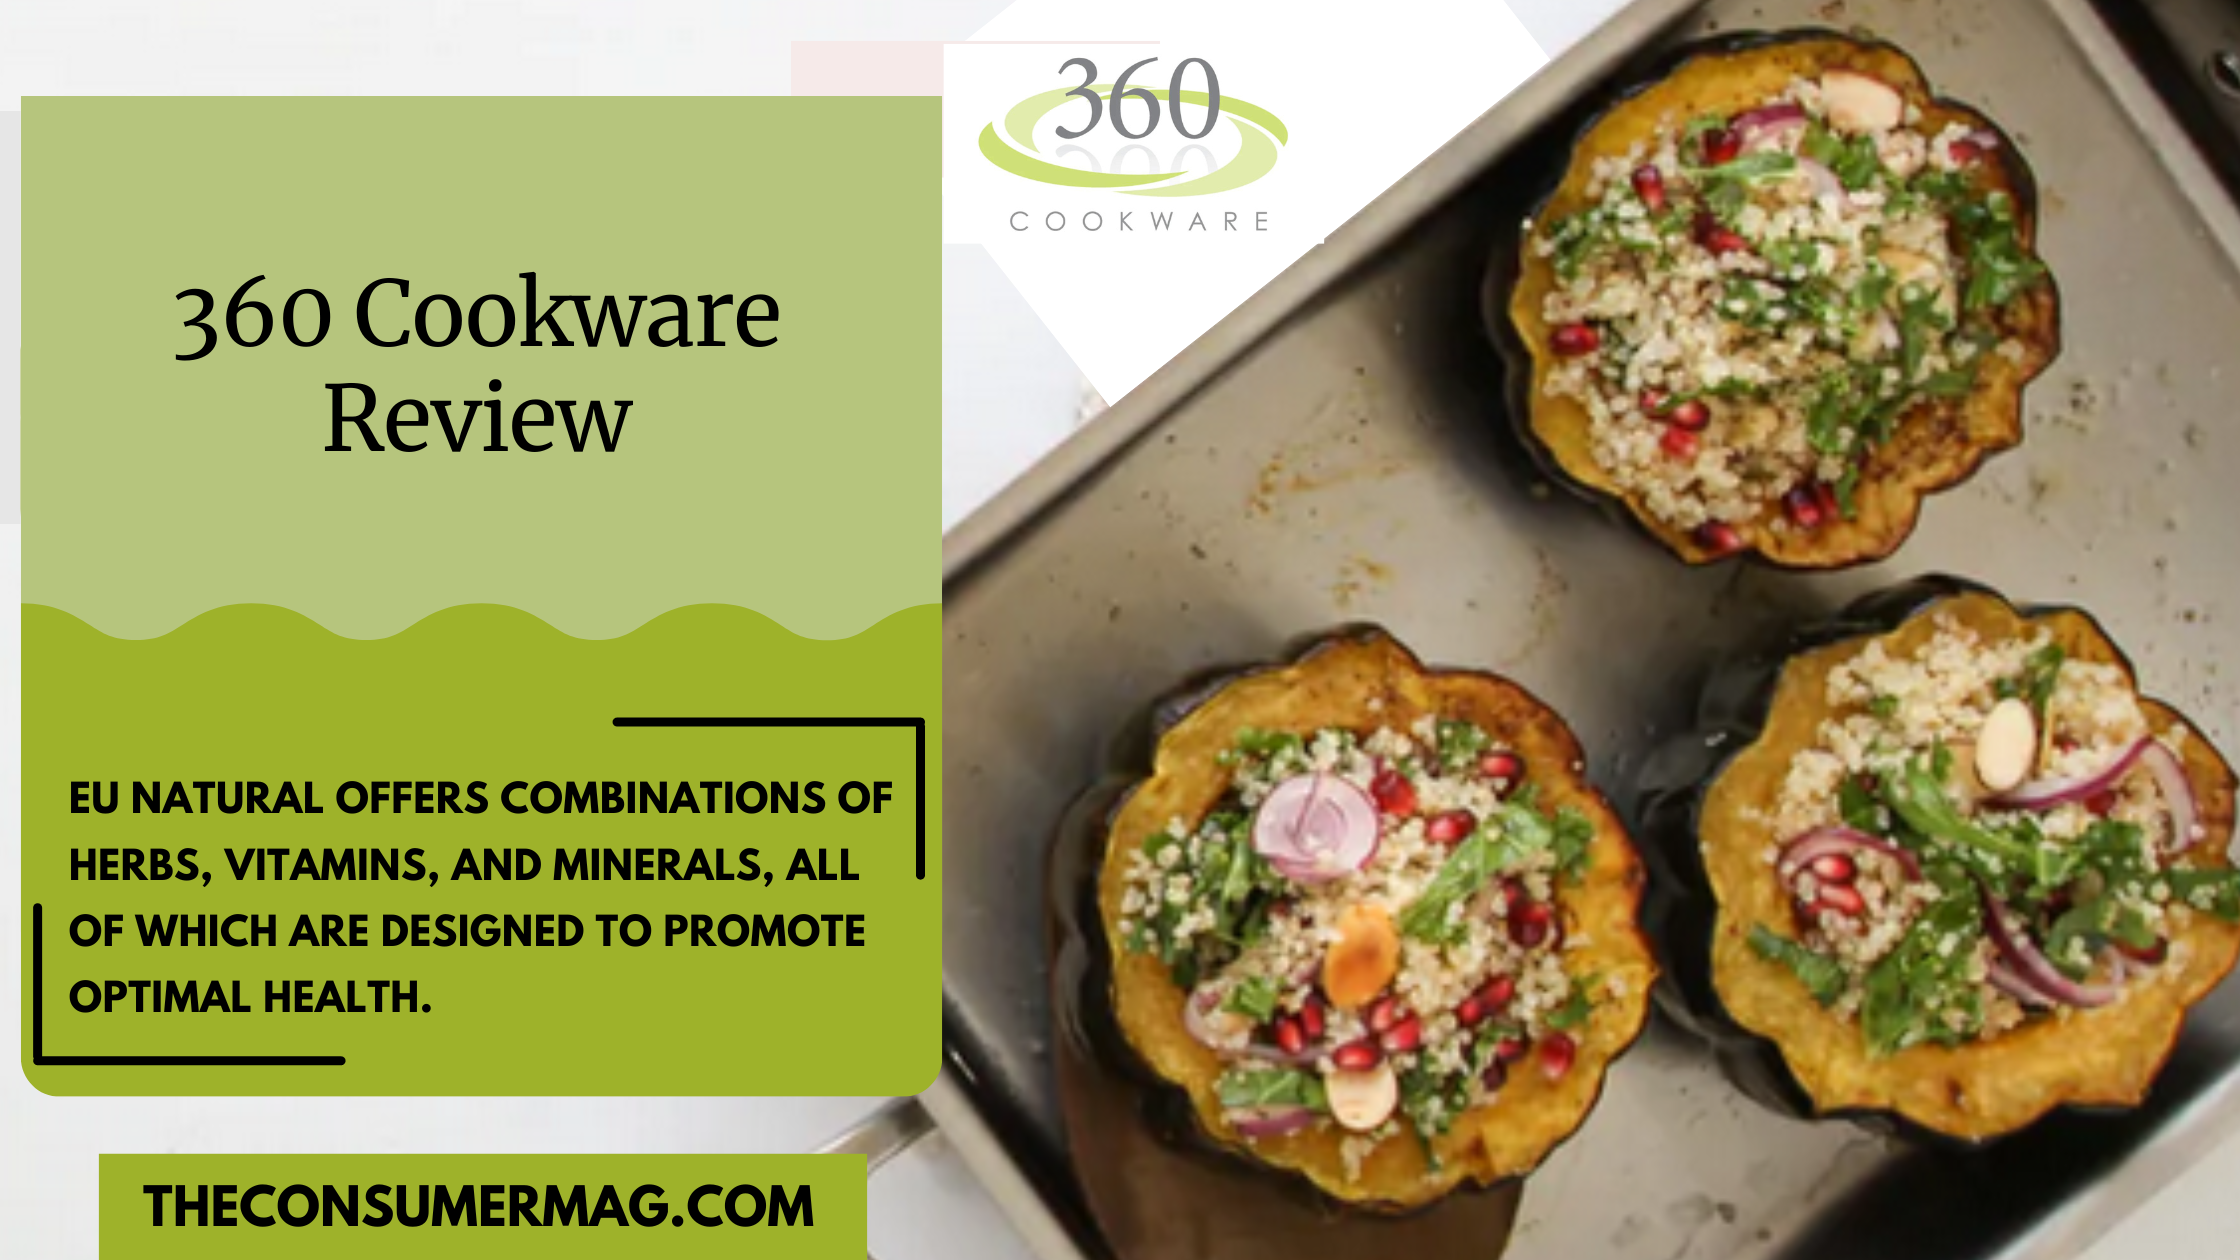 360 Cookware featured image